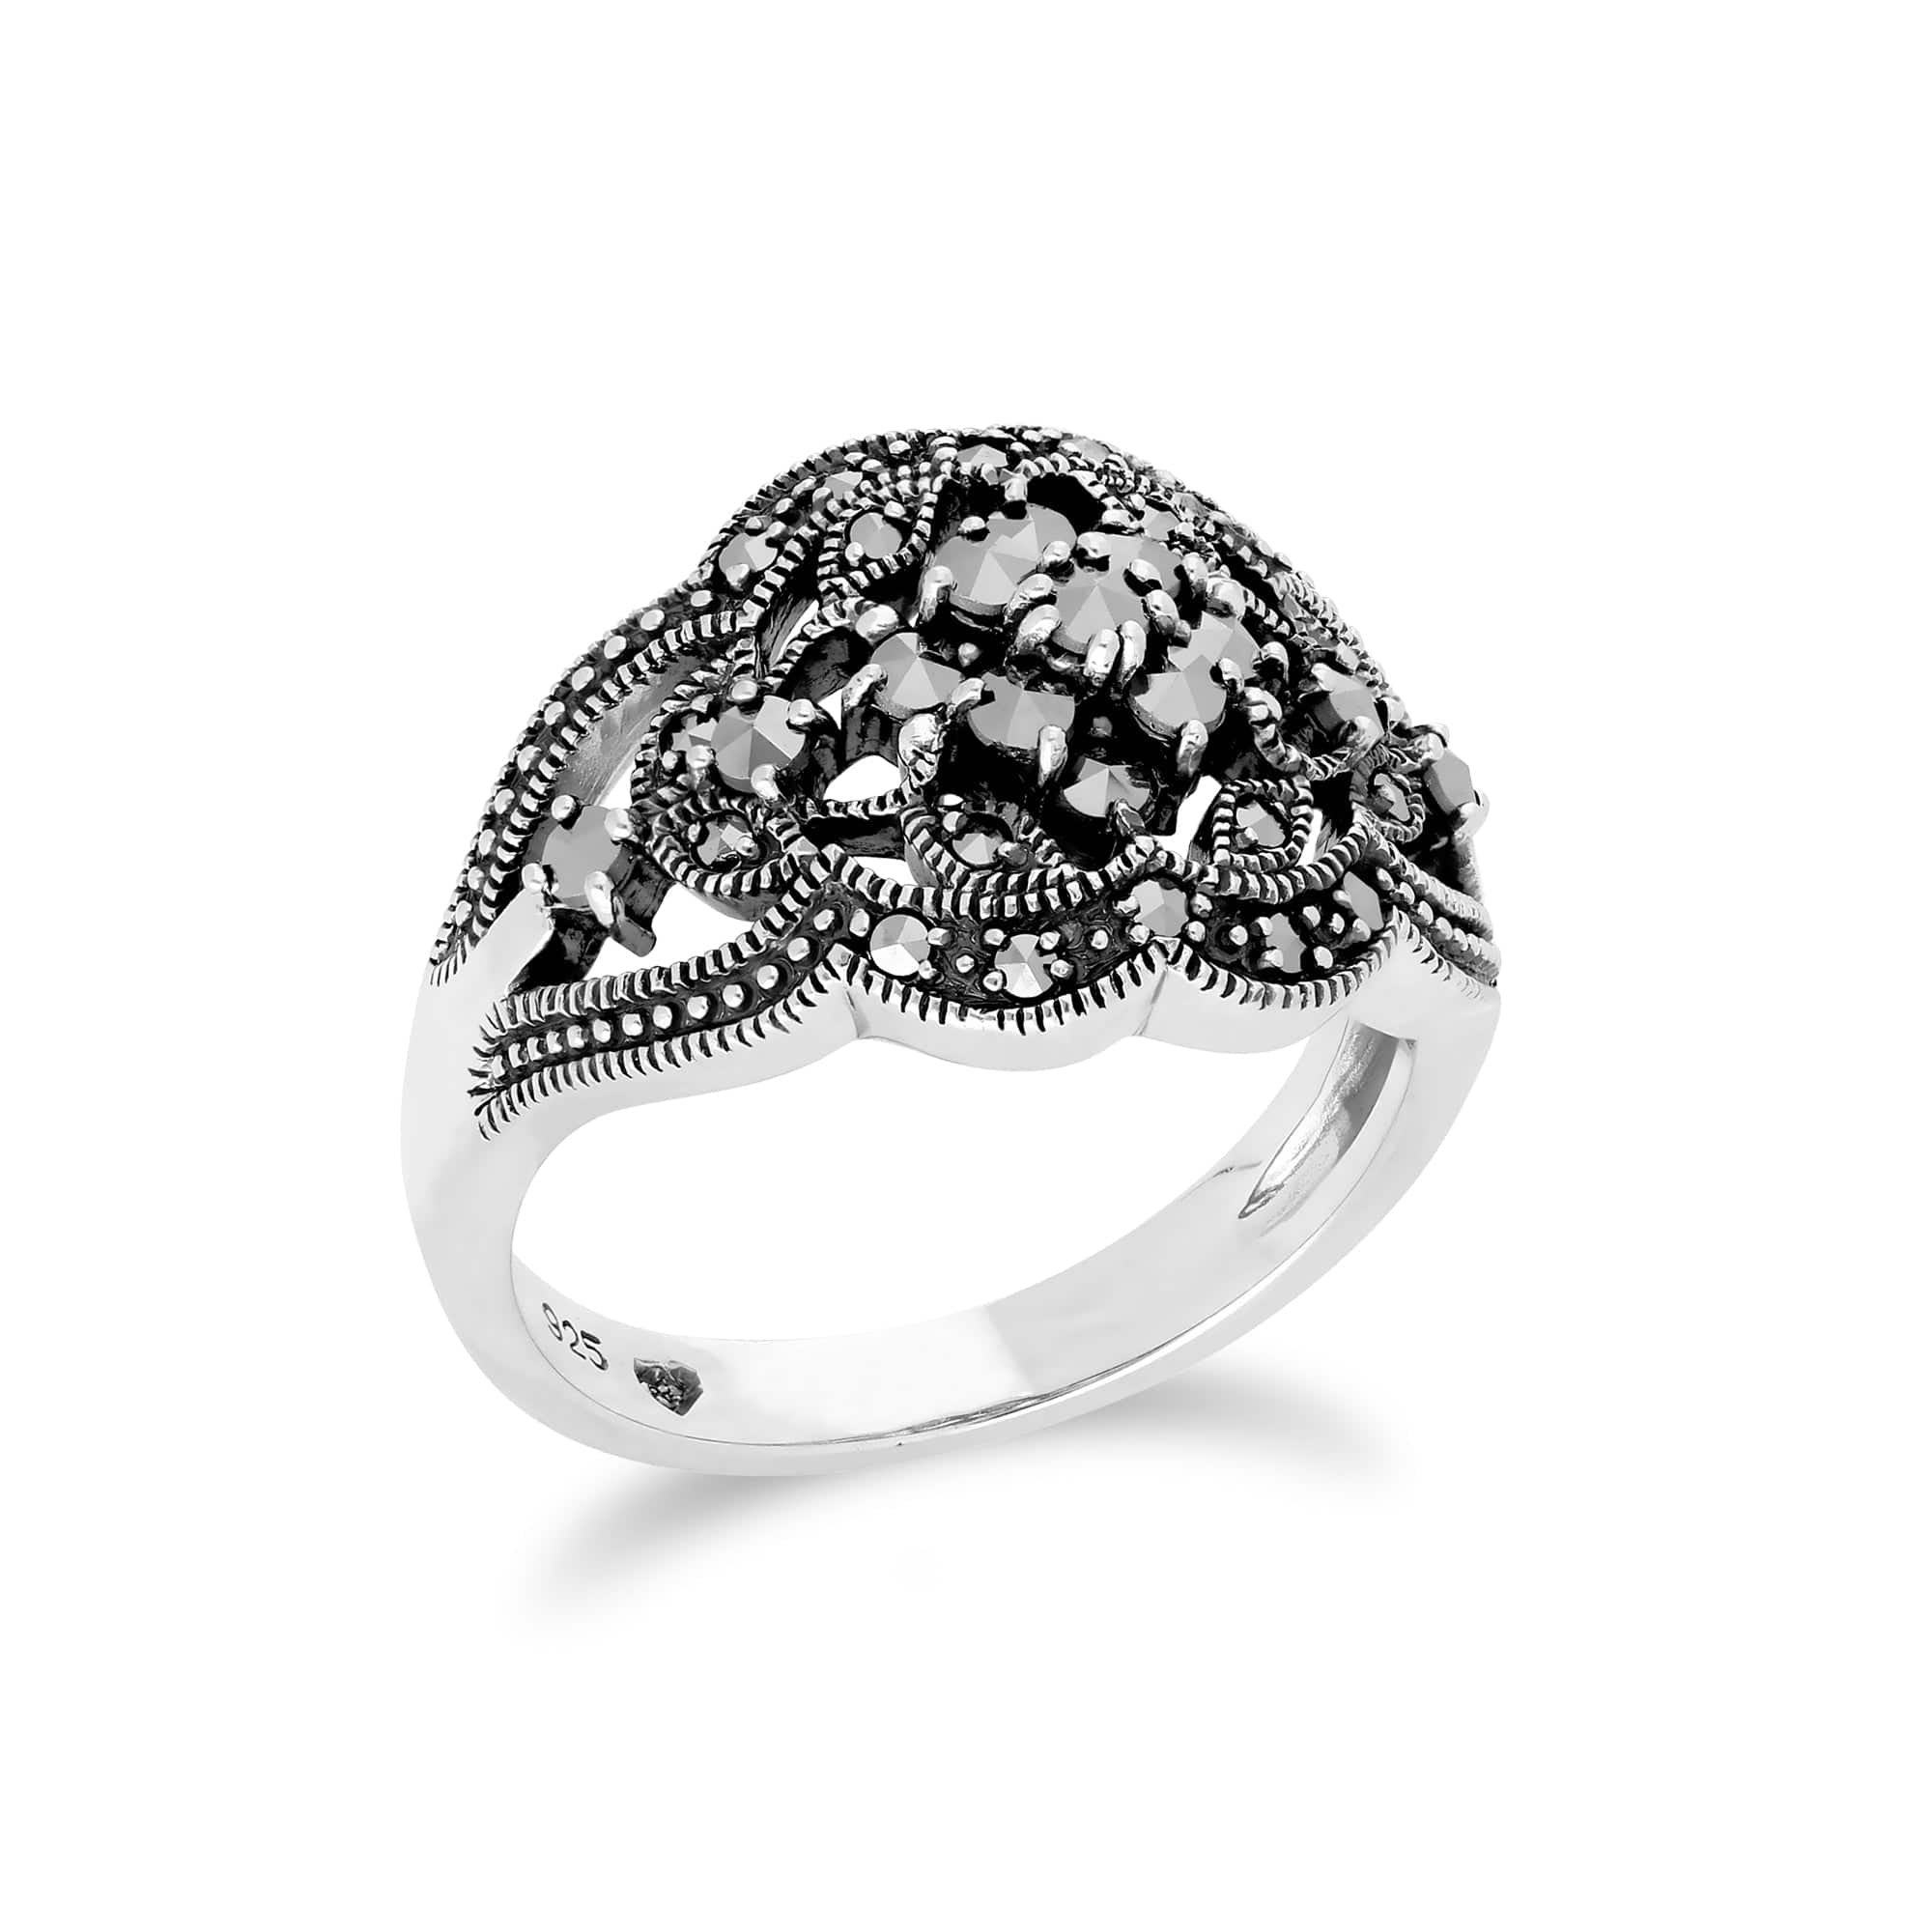 214R568501925 Art Nouveau Style Round Marcasite Cluster Ring in 925 Sterling Silver 2